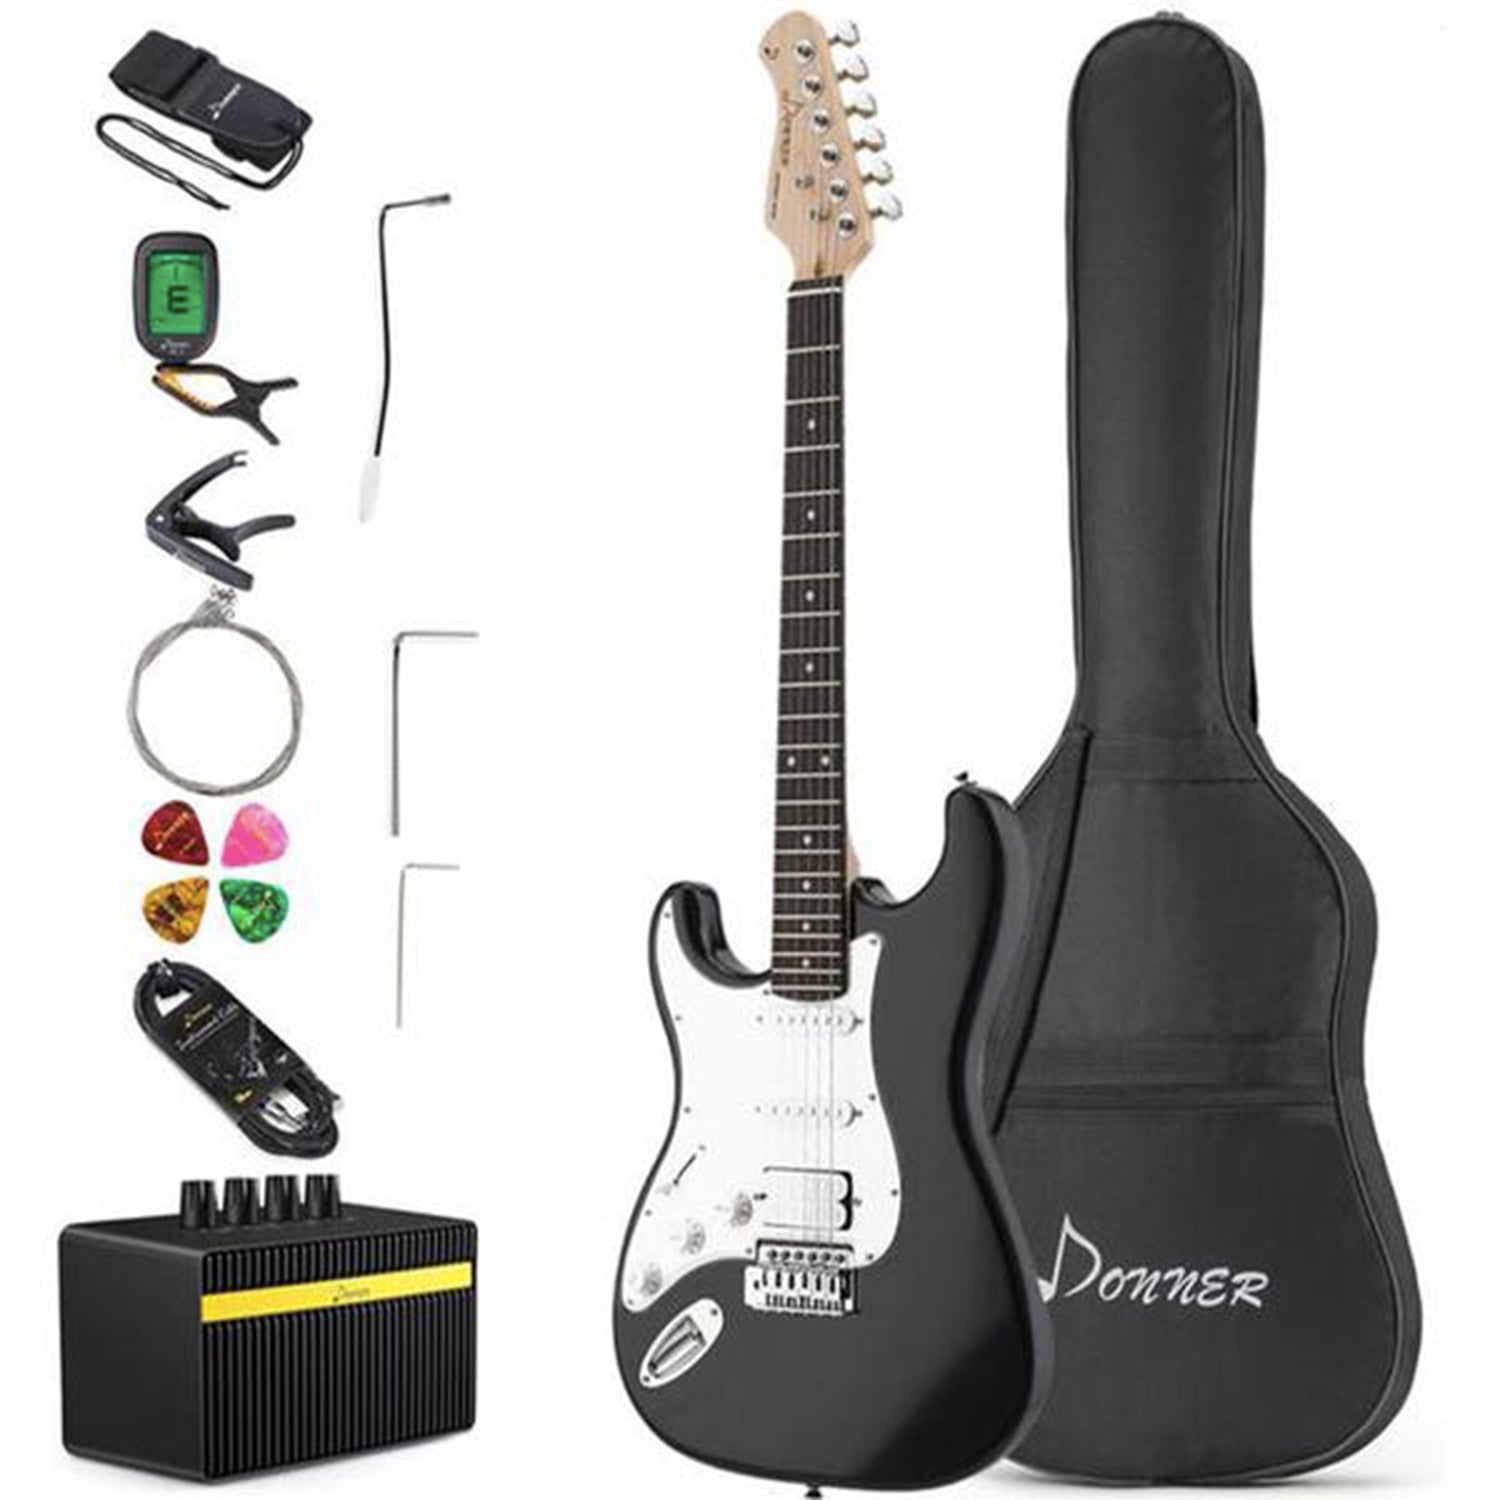 

Donner DST-100 Left Handed Full-Size ST Electric Guitar 39 Inch with Amplifer/Bag/Capo/Strap/String/Tuner/Cable/Picks